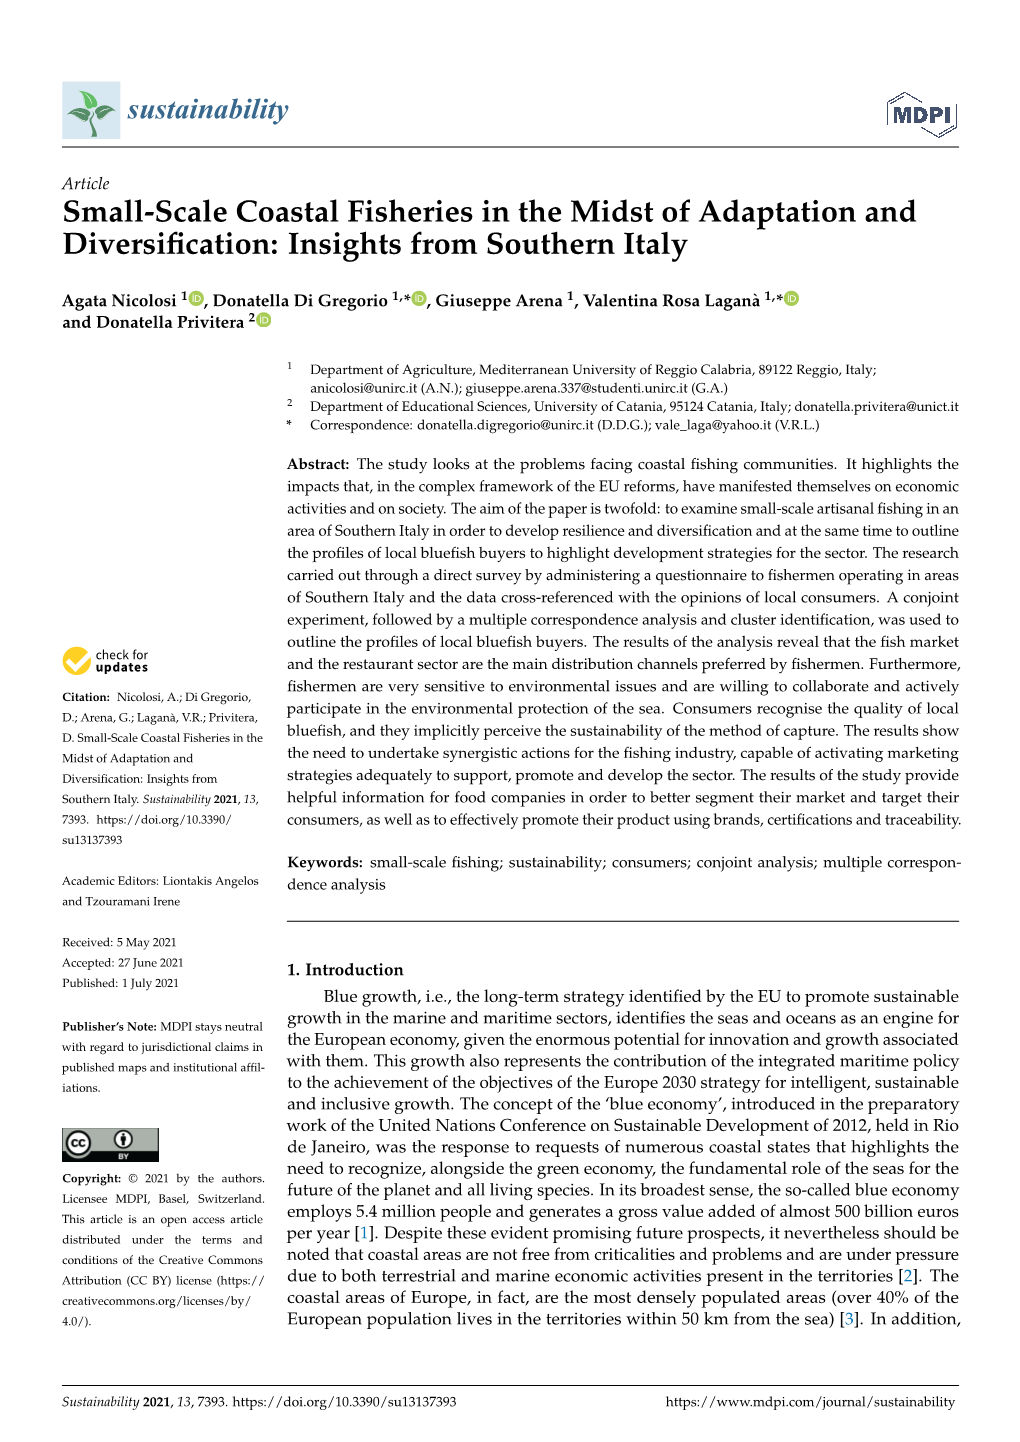 Small-Scale Coastal Fisheries in the Midst of Adaptation and Diversification: Insights from Southern Italy